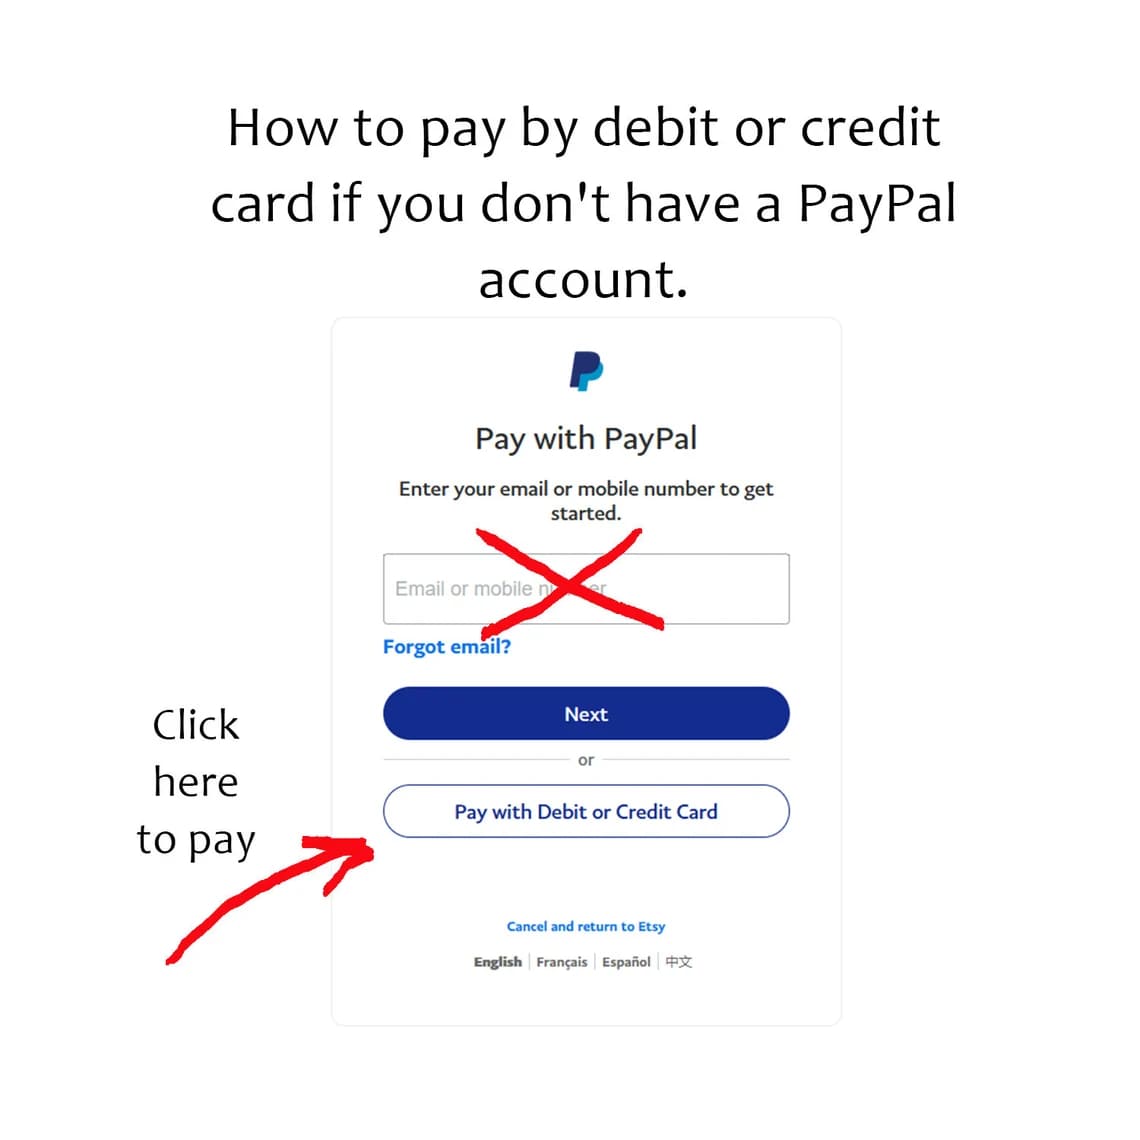 Inscription "How to pay bydebit or credit card if you don't have a PayPal account".